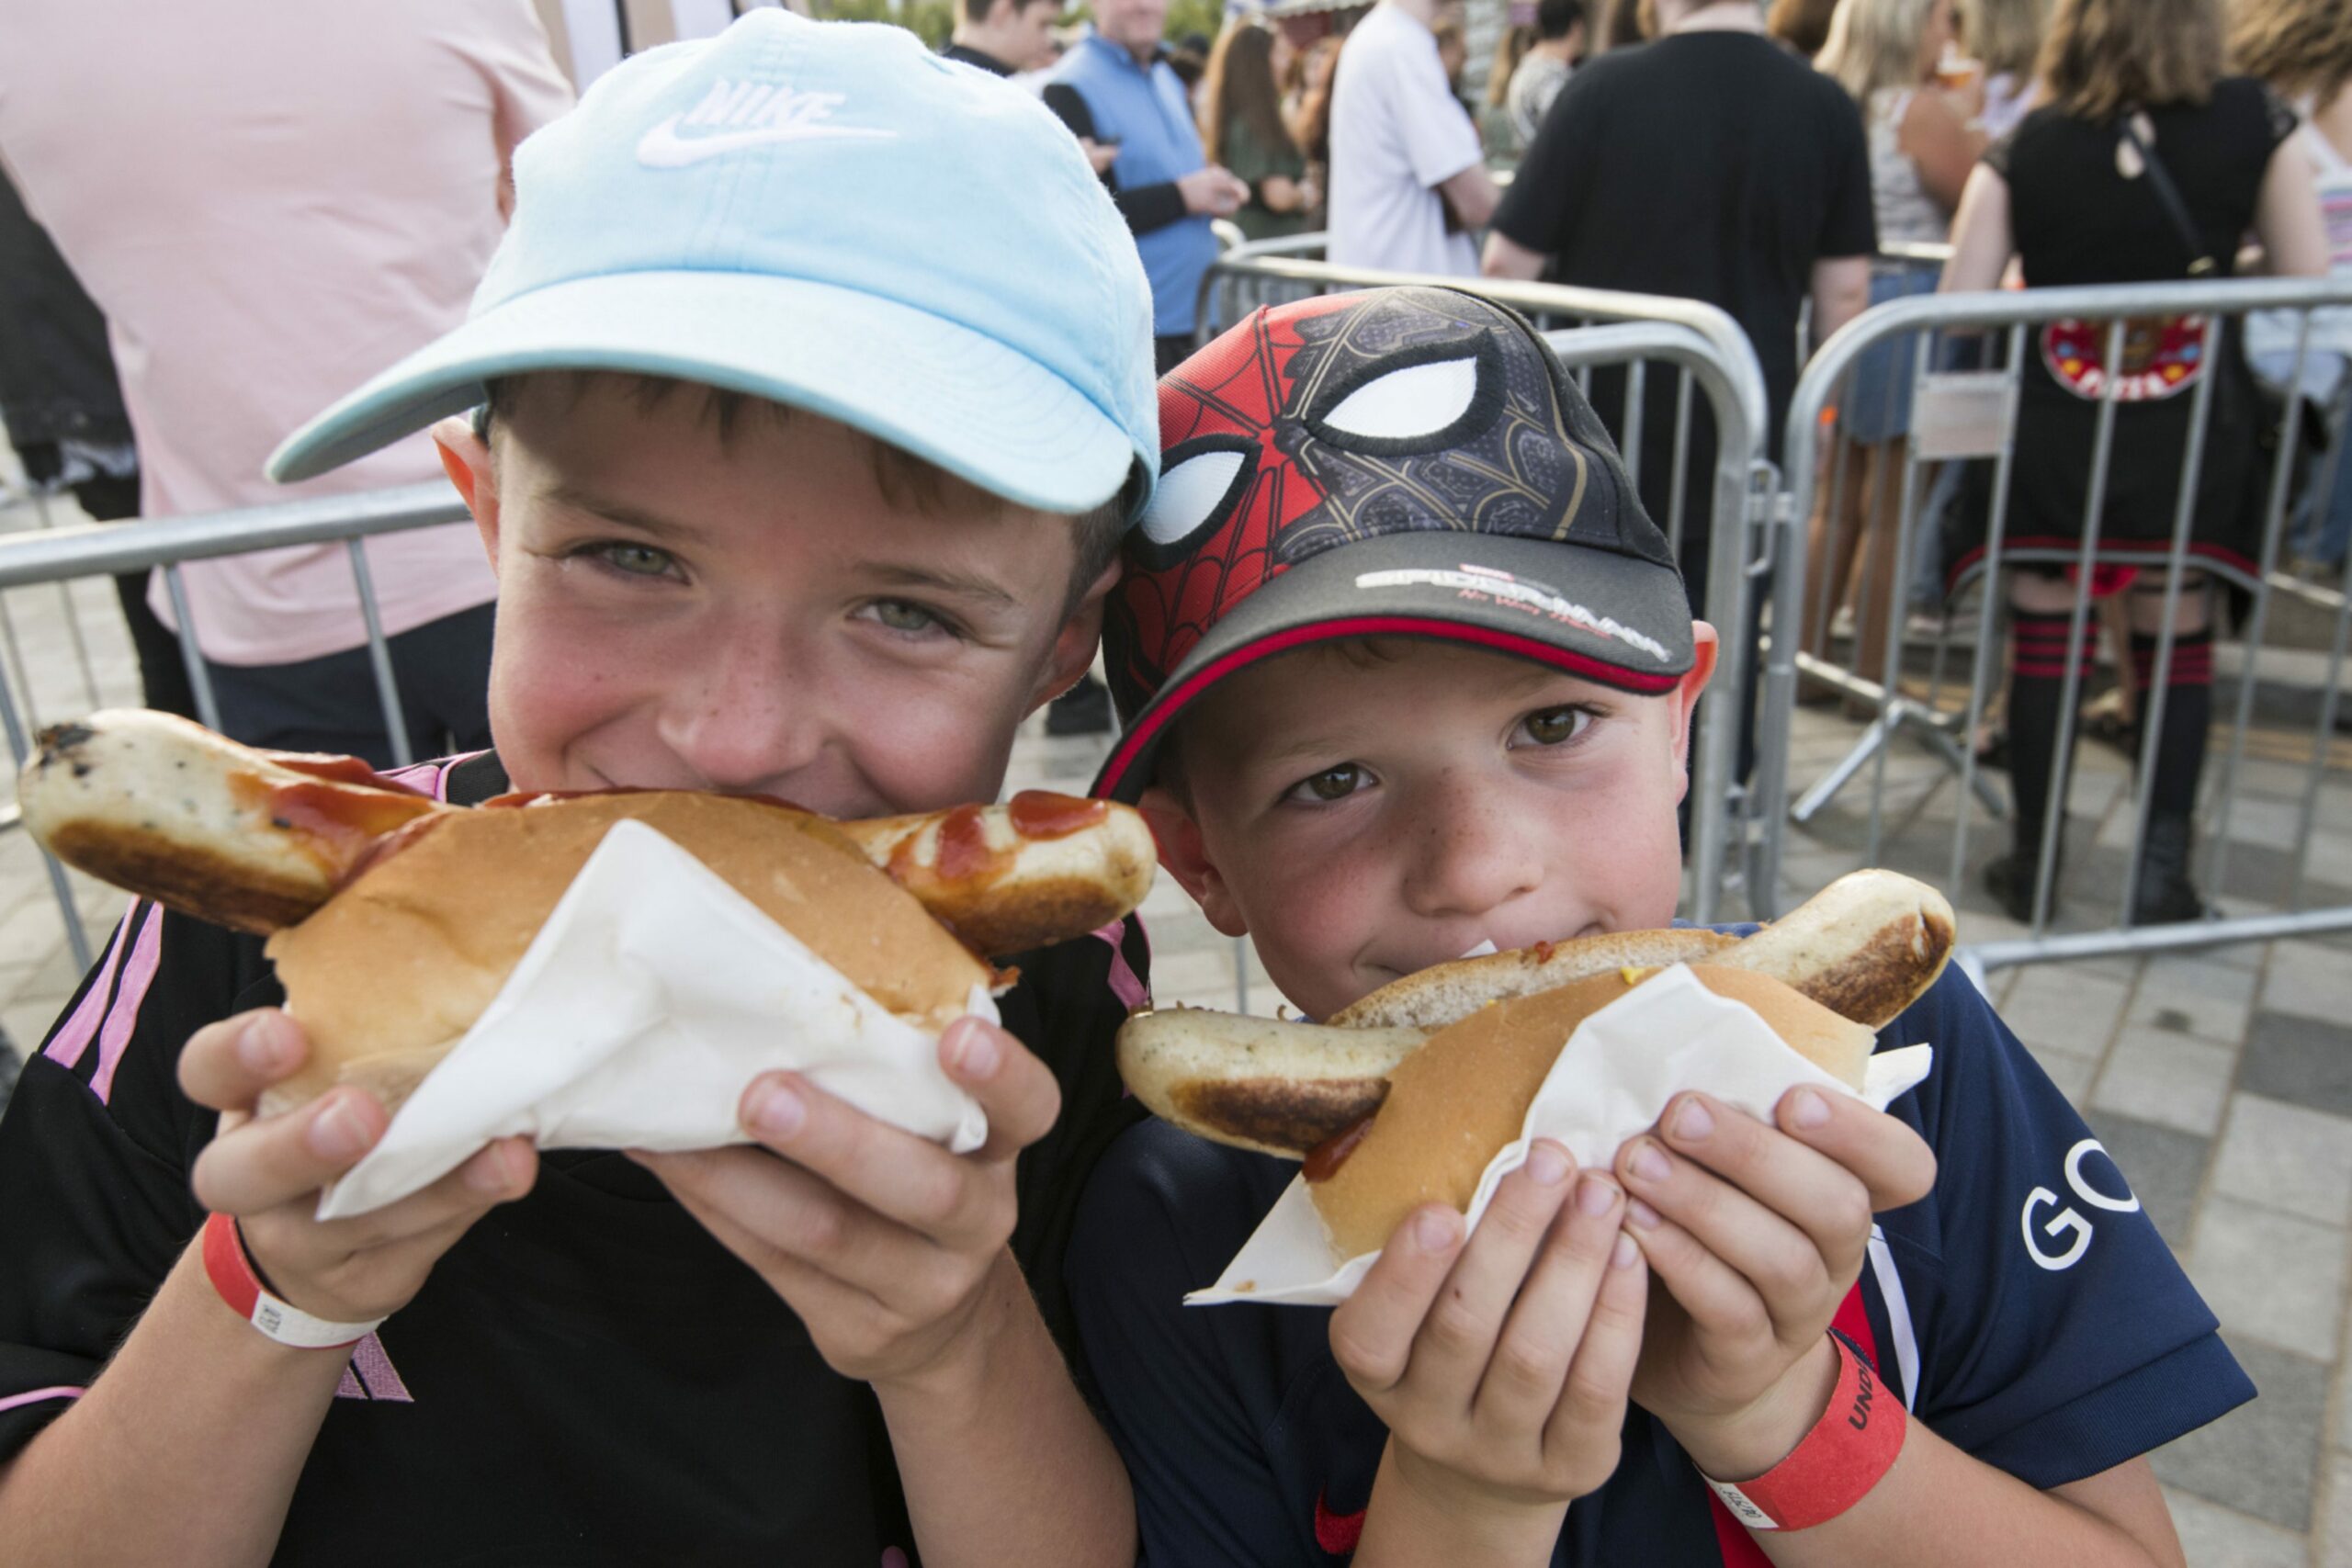 Hot Dog smiles from two youngsters at the Sausage and Cider Festival took place on Friday Night at Dundee's Slessor Gardens.